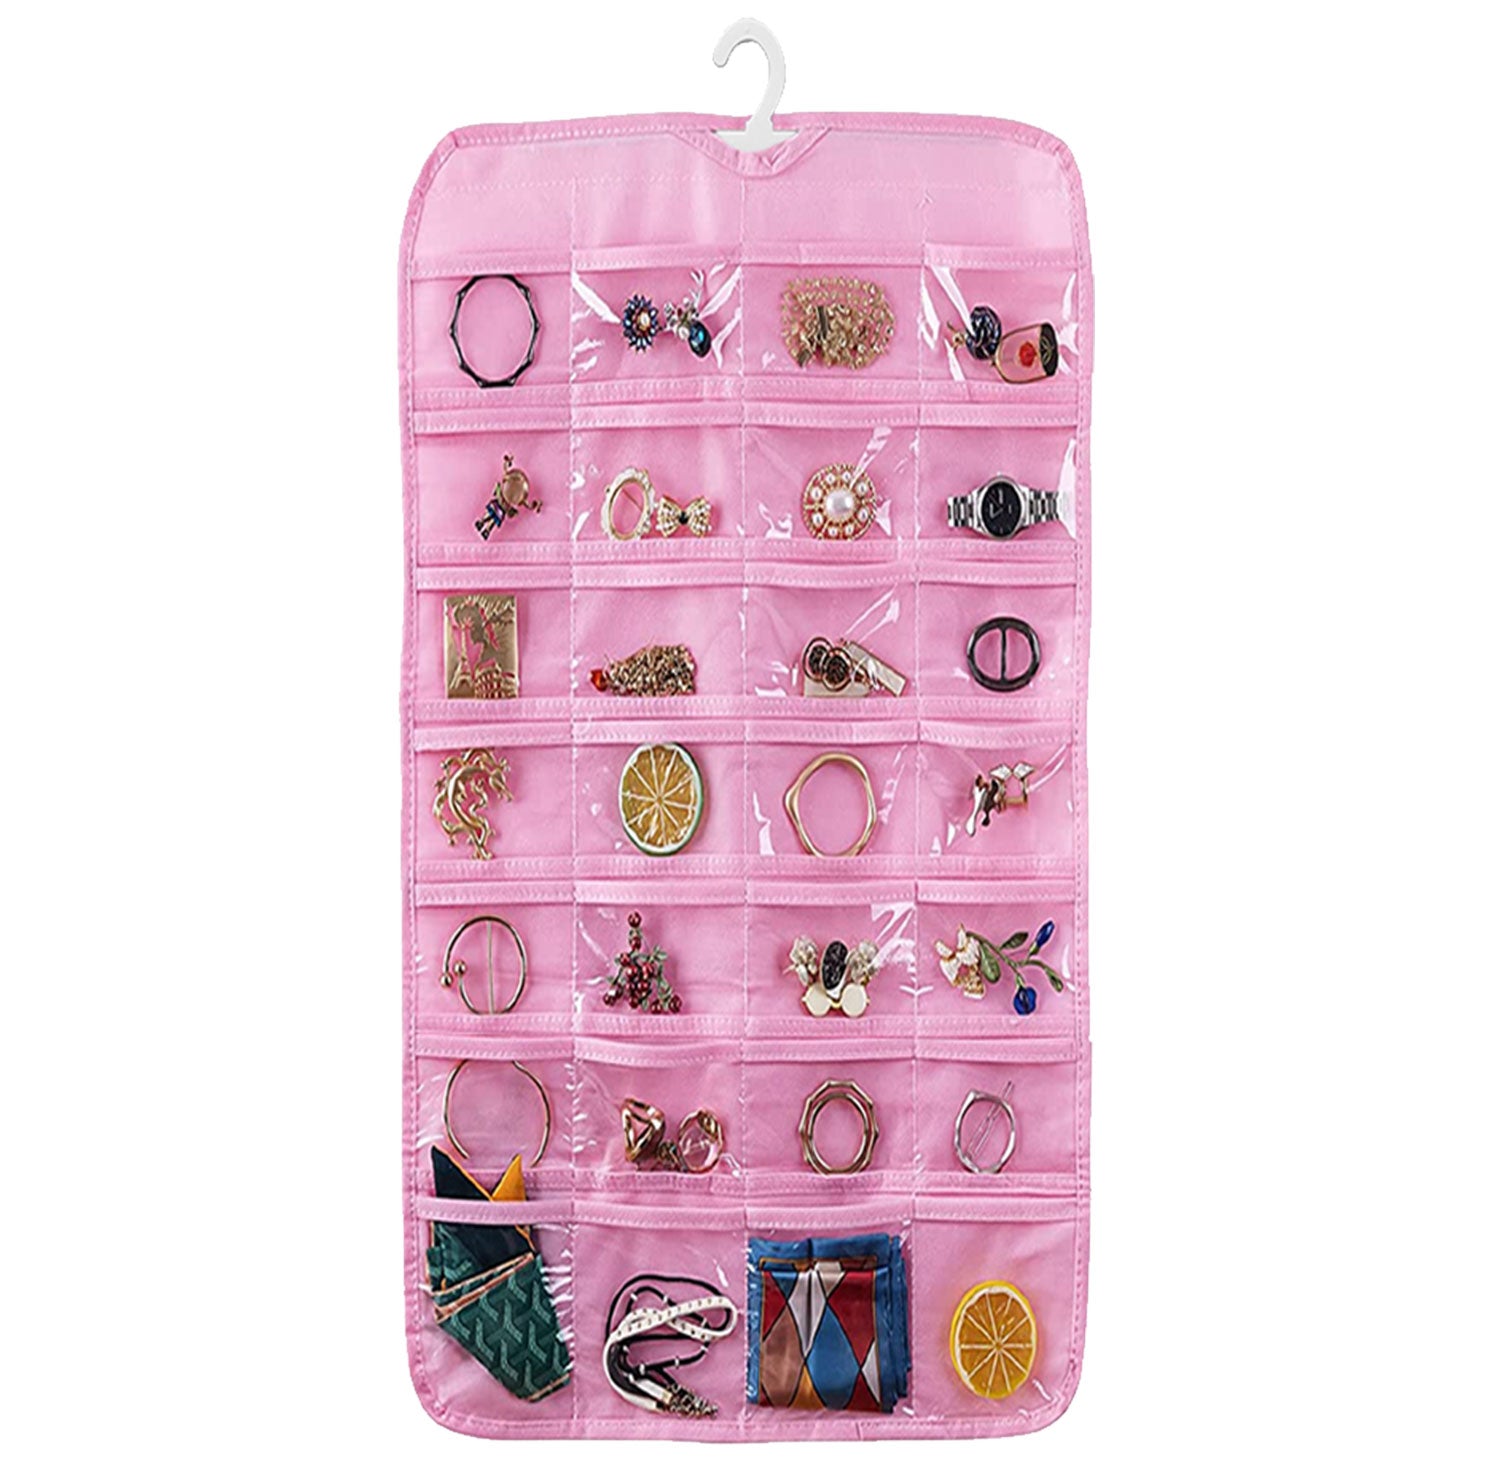 Efficient Hanging Jewelry Organizer with Embossed Pattern and 28 Clear PVC Pockets: Organize Your Jewelry in Style Fast Forward